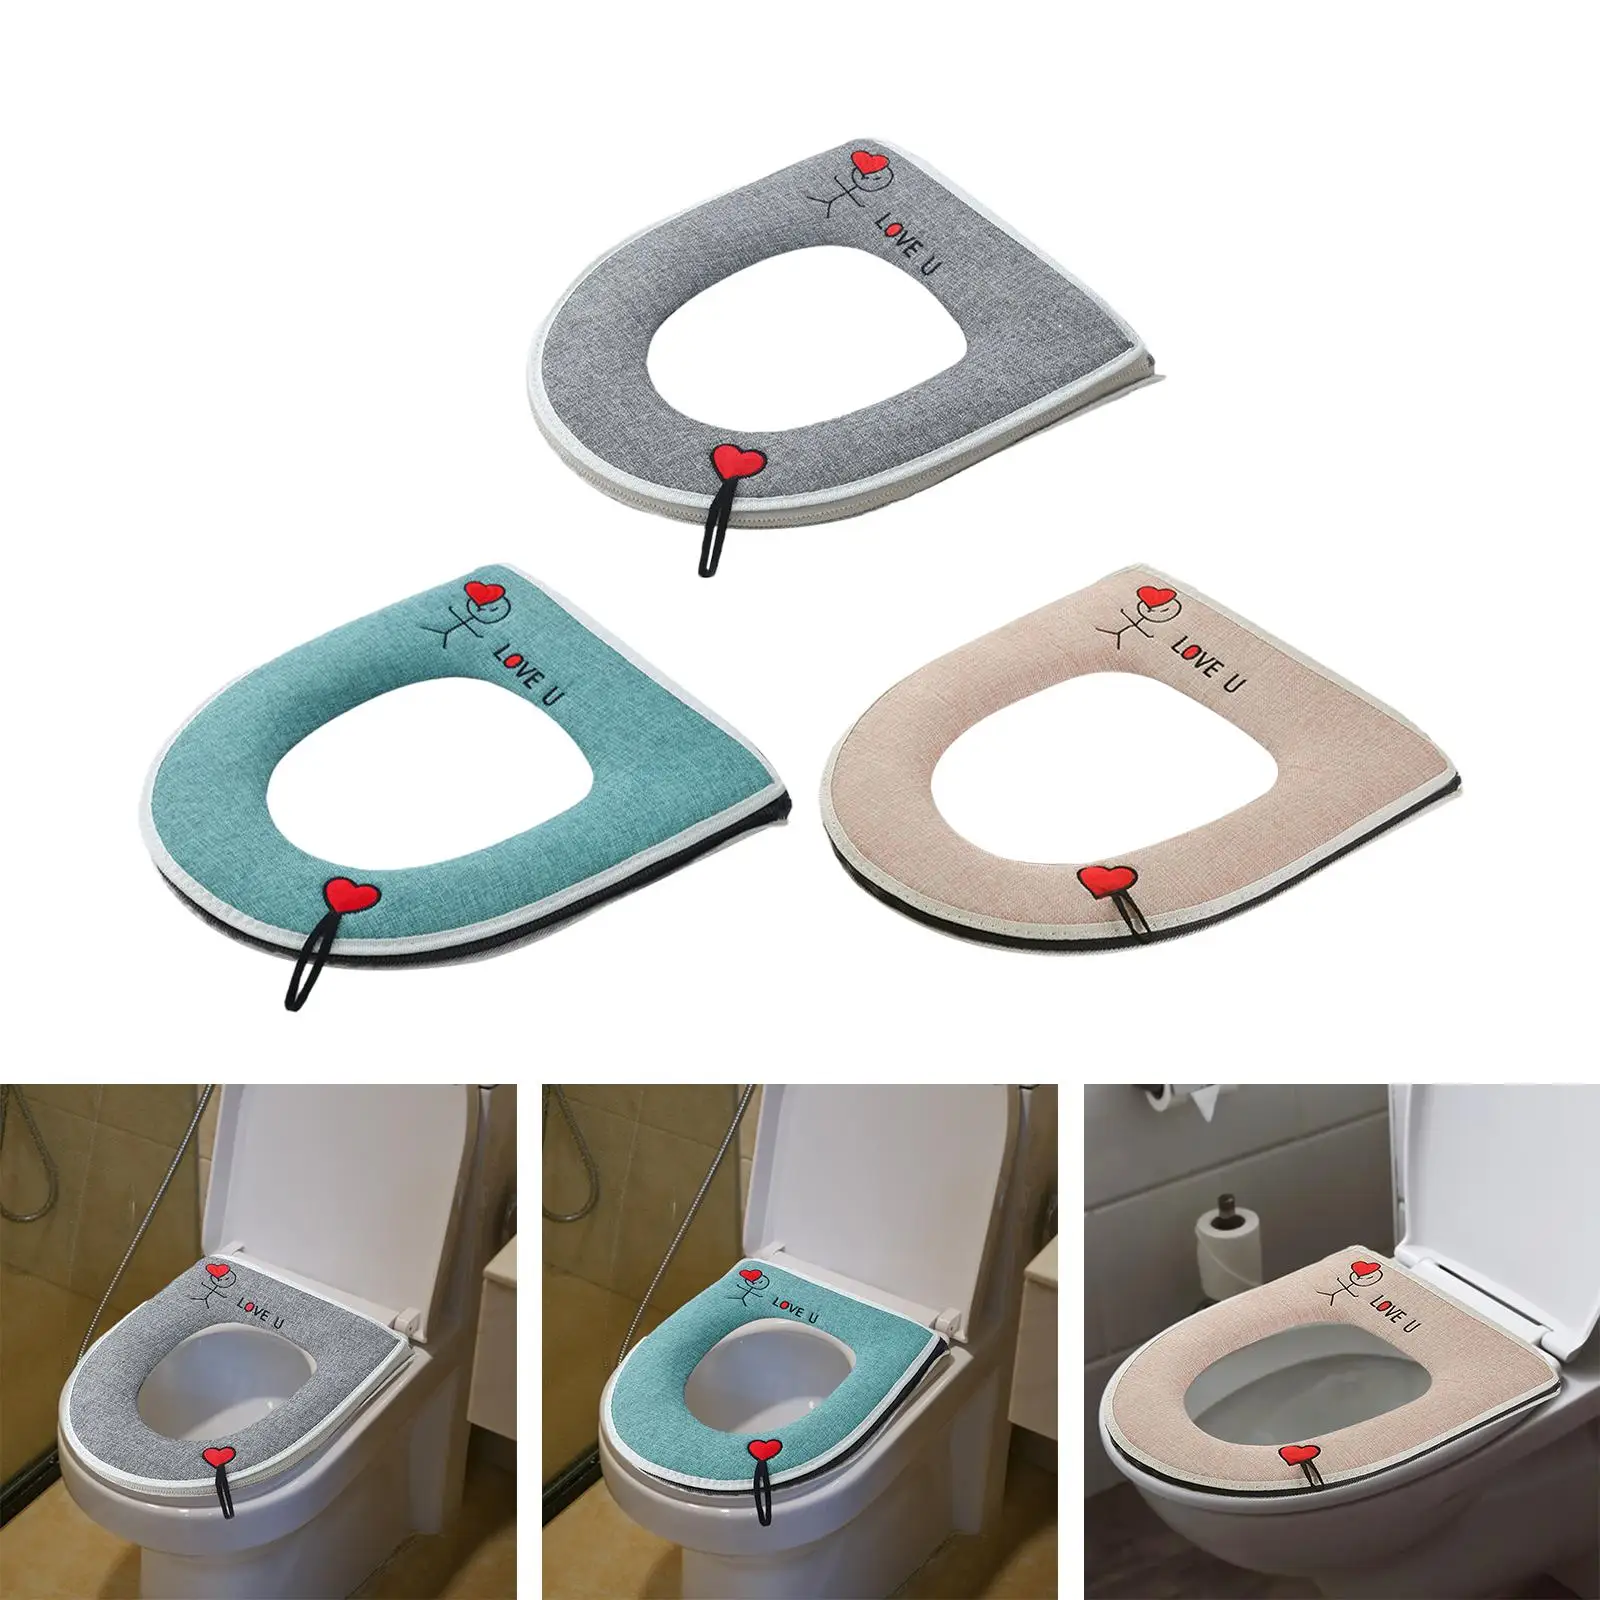 Thicken Toilet Seat Cushion Breatheable Universal Toilet Seat Mat Toilet Seat Cover Pads for Bathroom Traveling Hotel Household